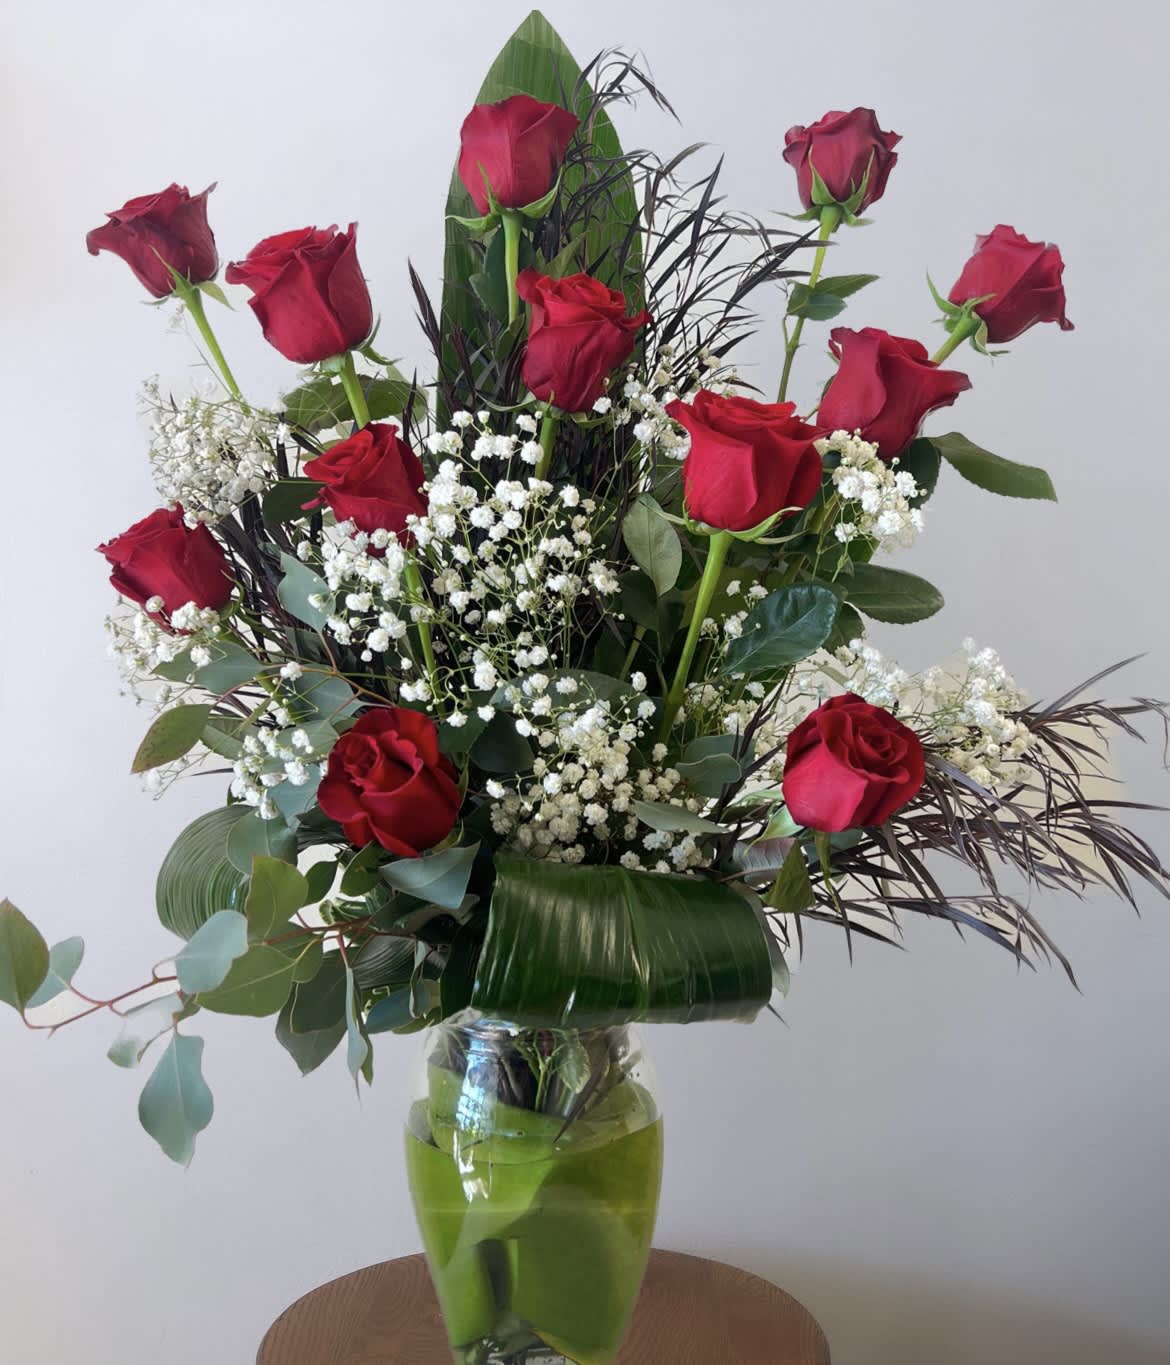 Forever and Always: Glamorous Dozen Red Roses - Dozen red roses arranged front facing with modern filler and greenery. 